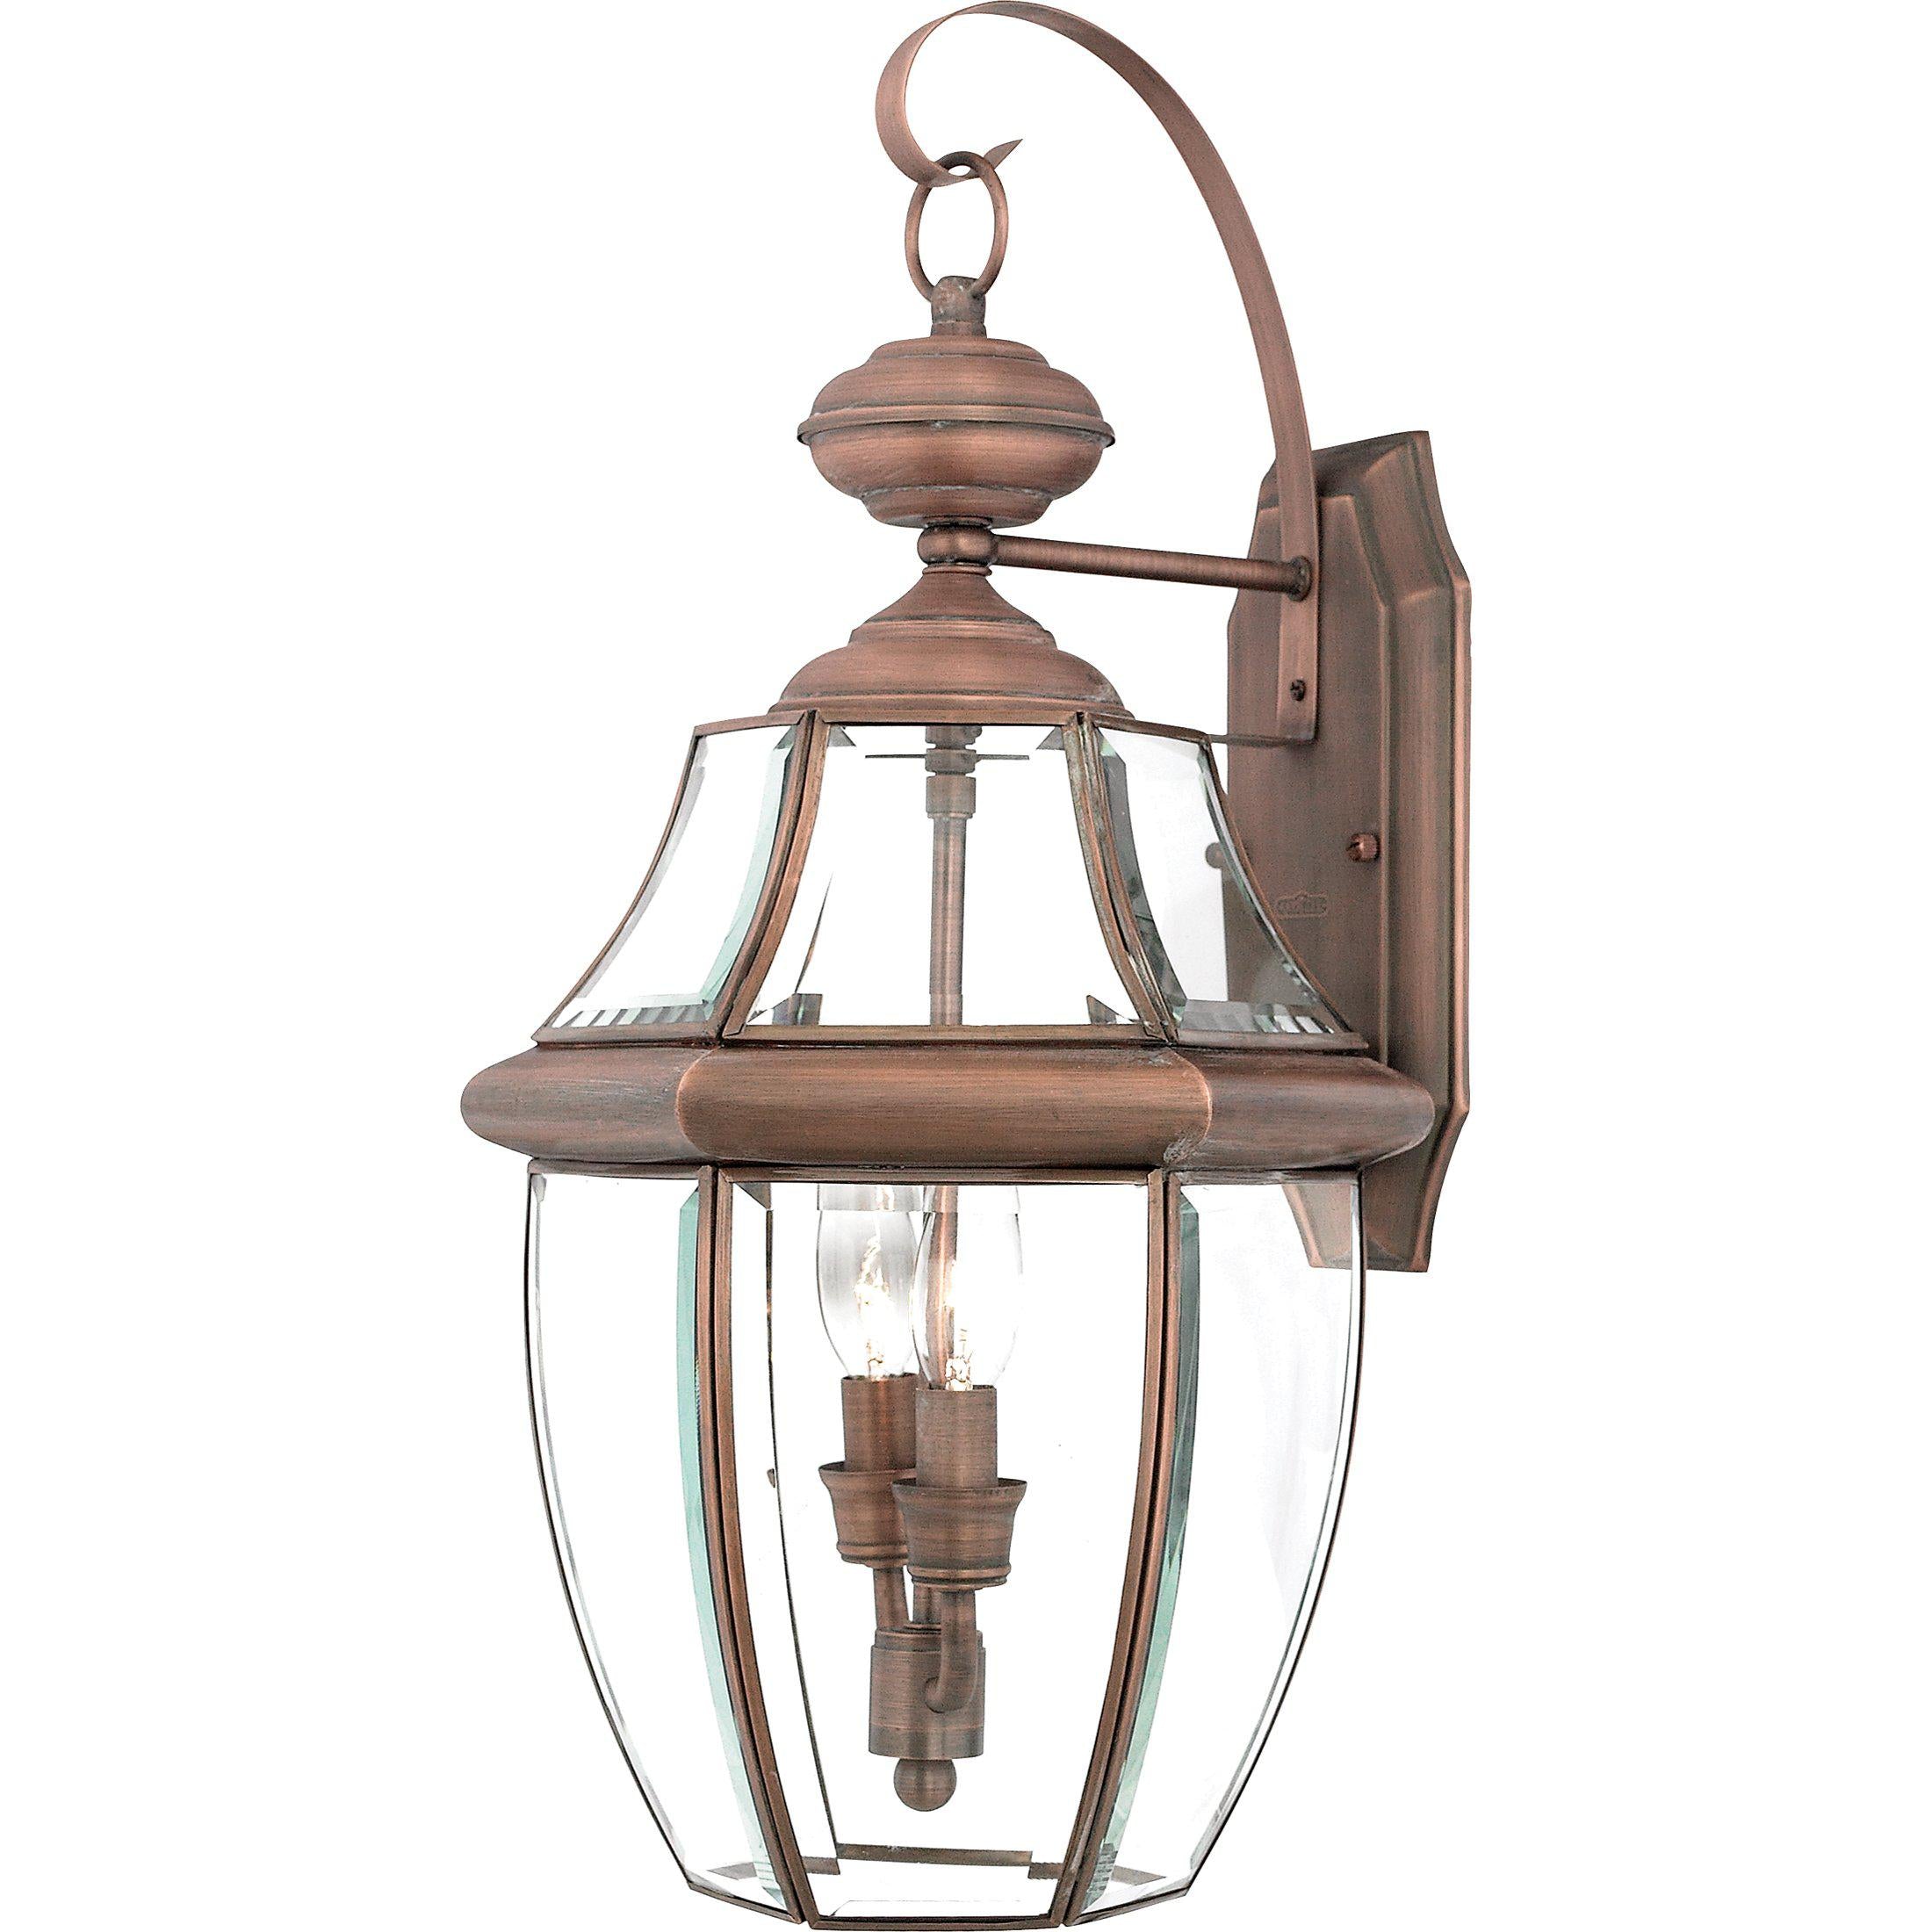 Quoizel  Newbury Outdoor Lantern, Large Outdoor l Wall Quoizel Aged Copper  